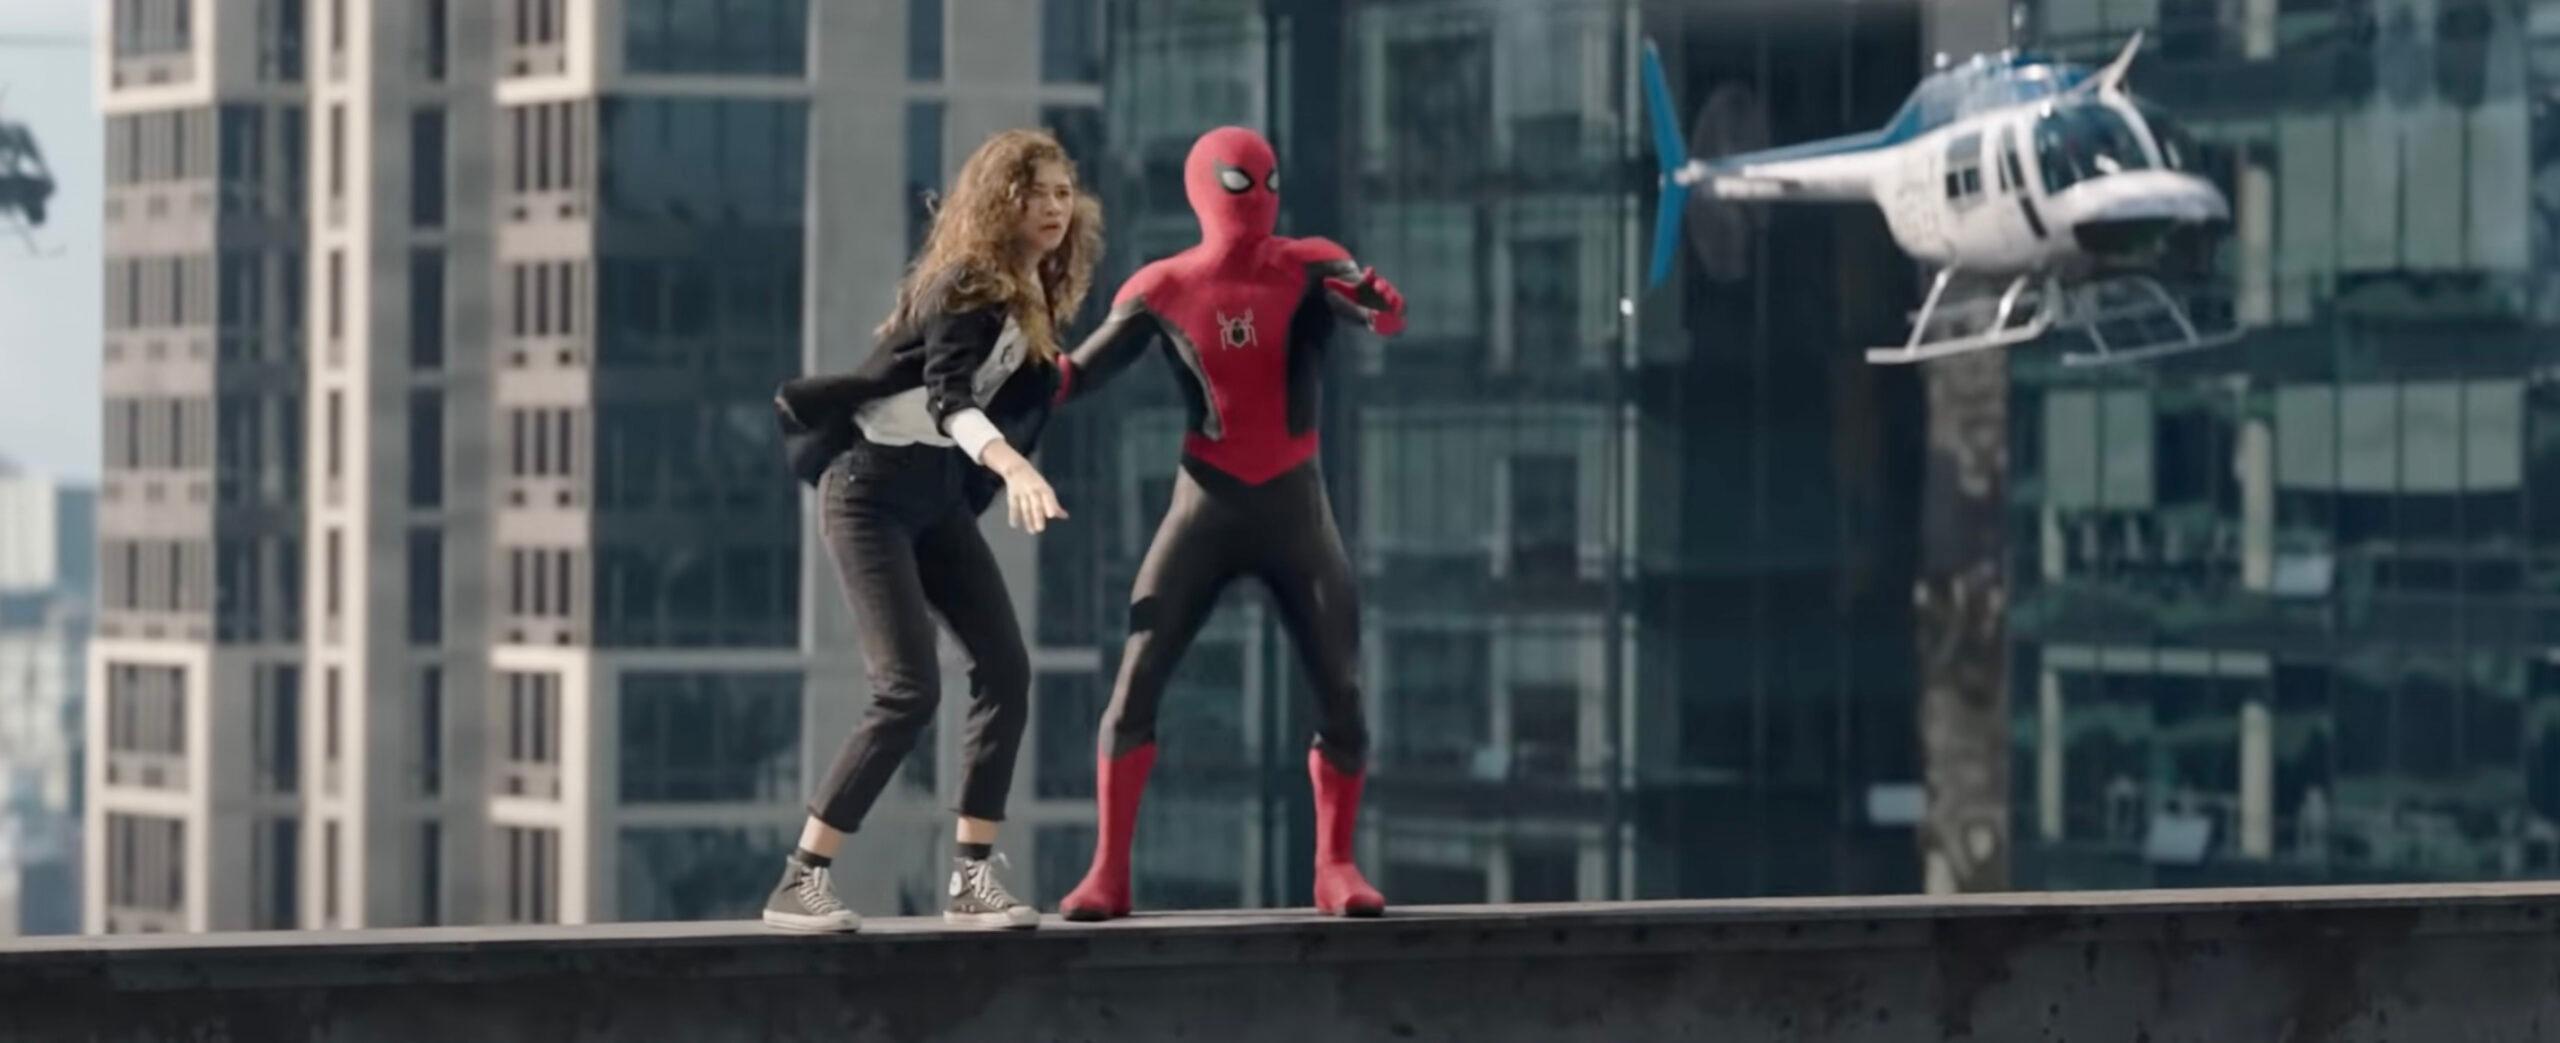 Does MJ Die in 'Spider-Man: No Way Home'? Here's Everything We Know